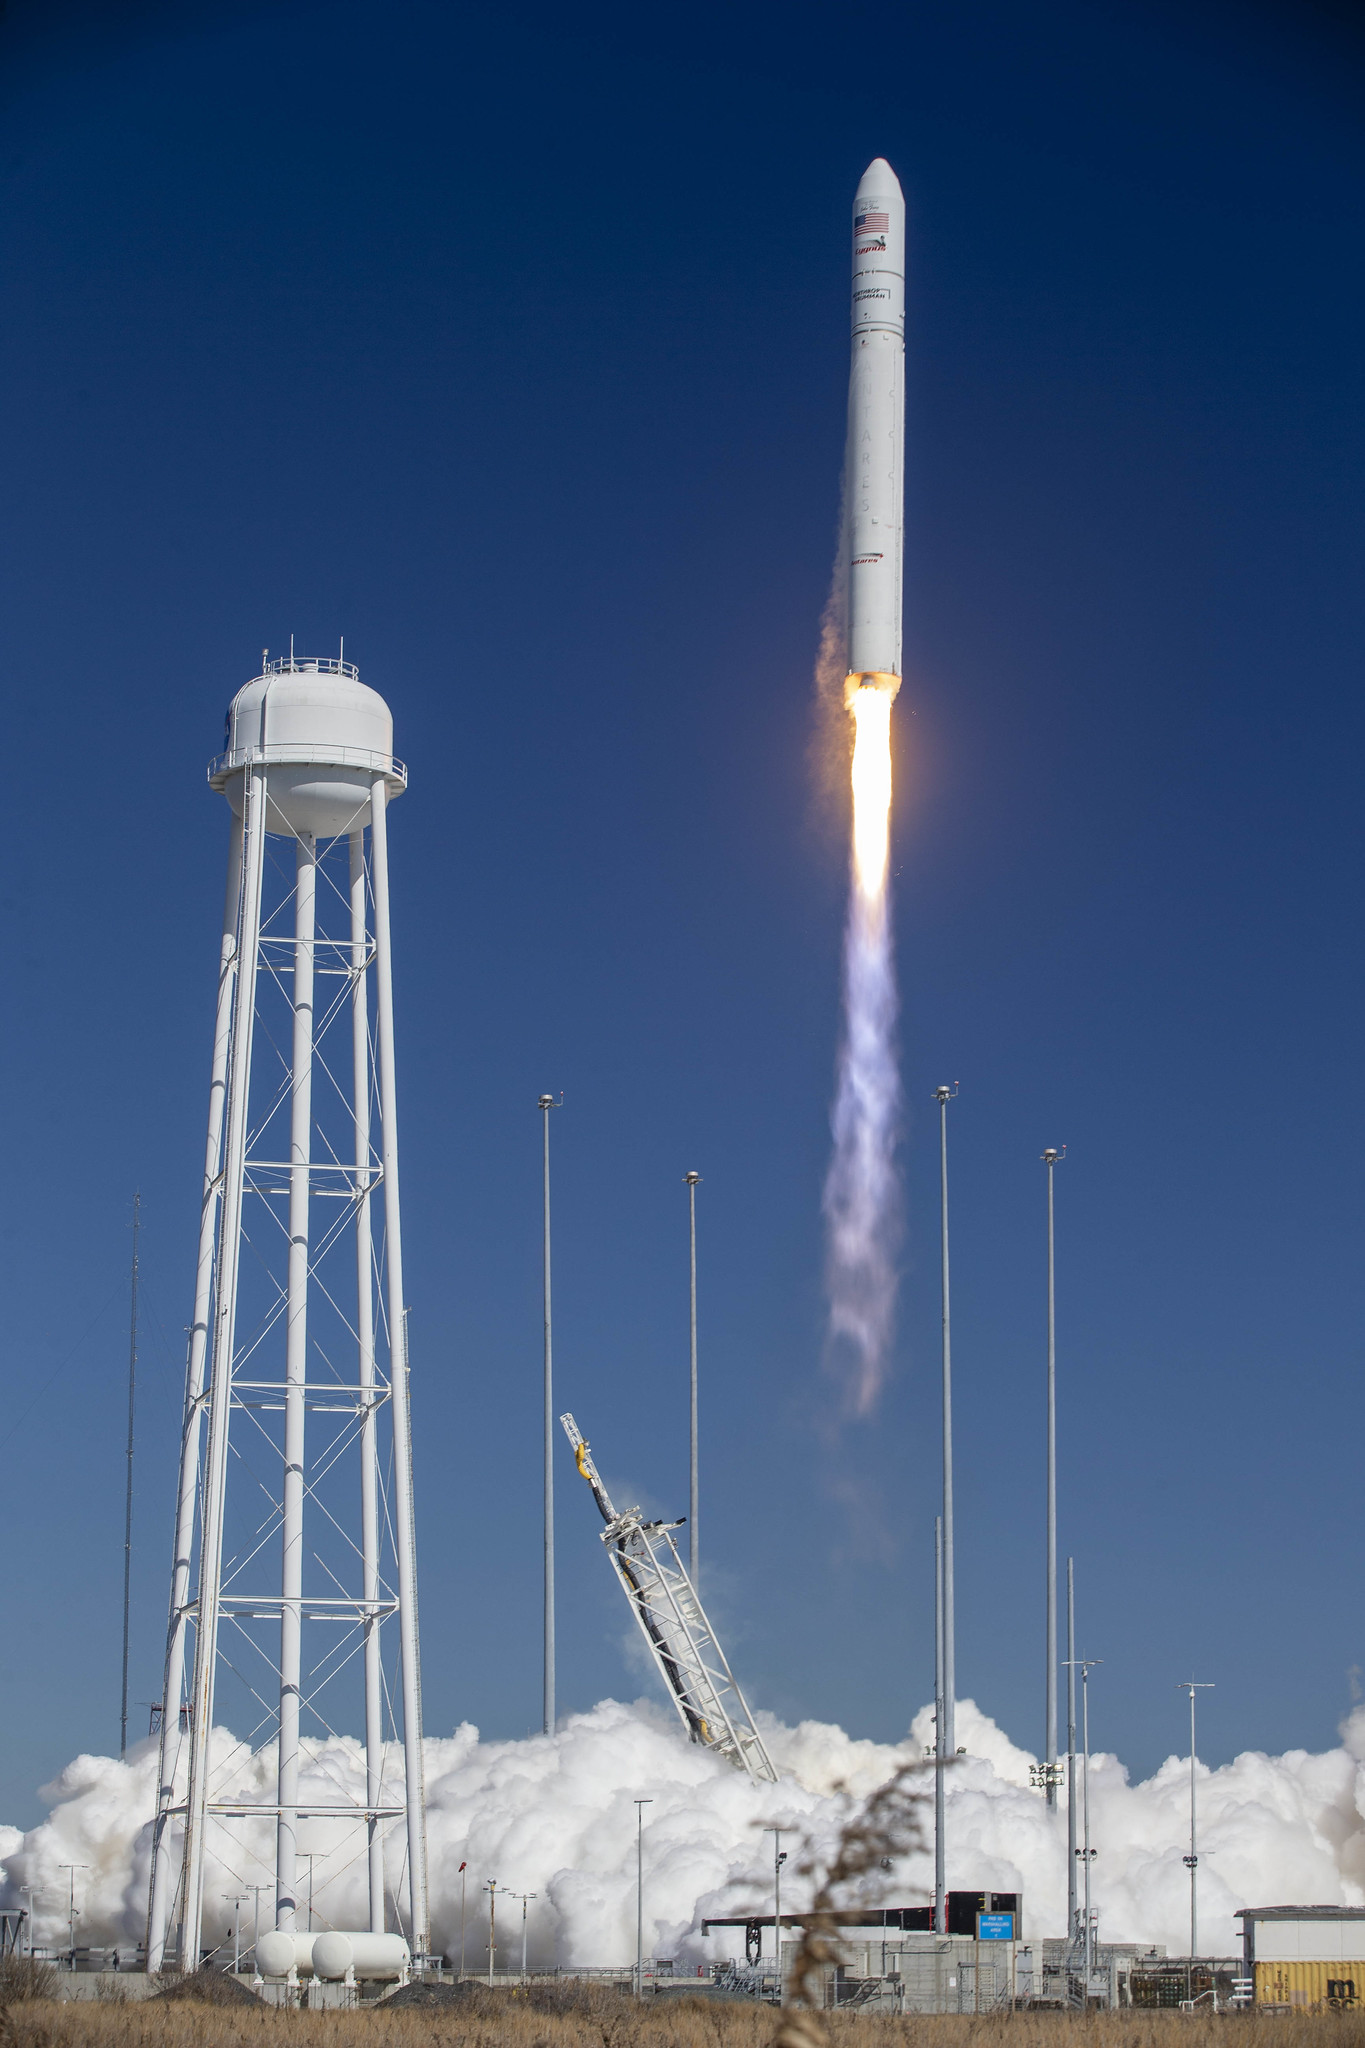 A Northrop Grumman Antares rocket, with the company’s Cygnus spacecraft onboard, launches at 12:40 p.m. EST, Saturday, Feb. 19., 2022, from the Mid-Atlantic Regional Spaceport’s Pad-0A, at NASA's Wallops Flight Facility in Virginia.